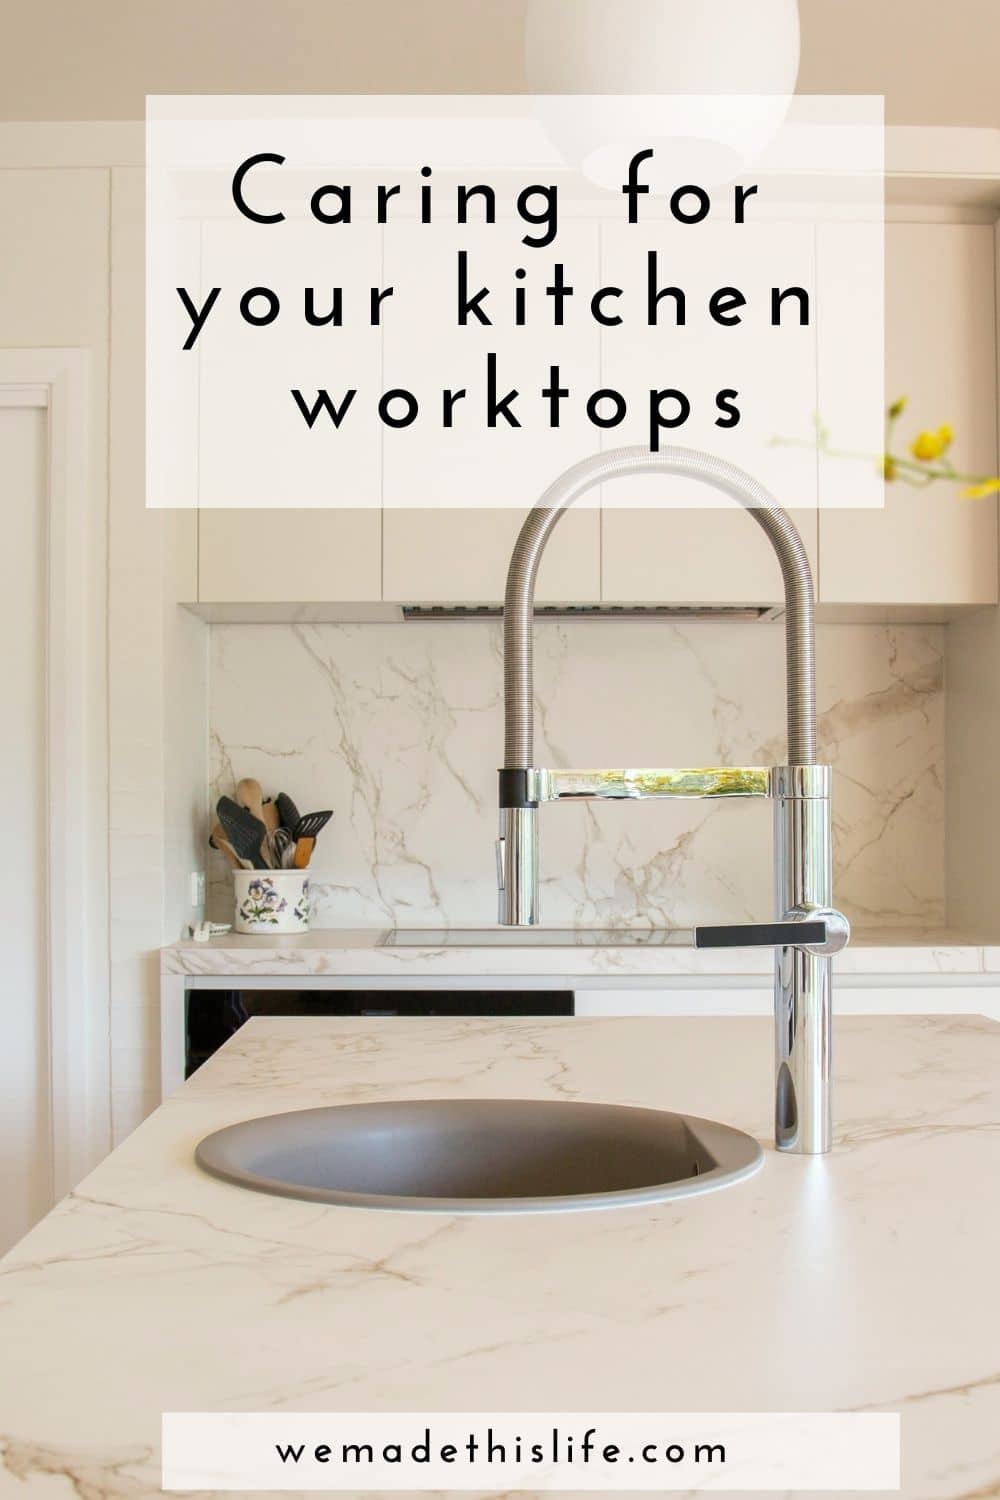 Caring for your kitchen worktops